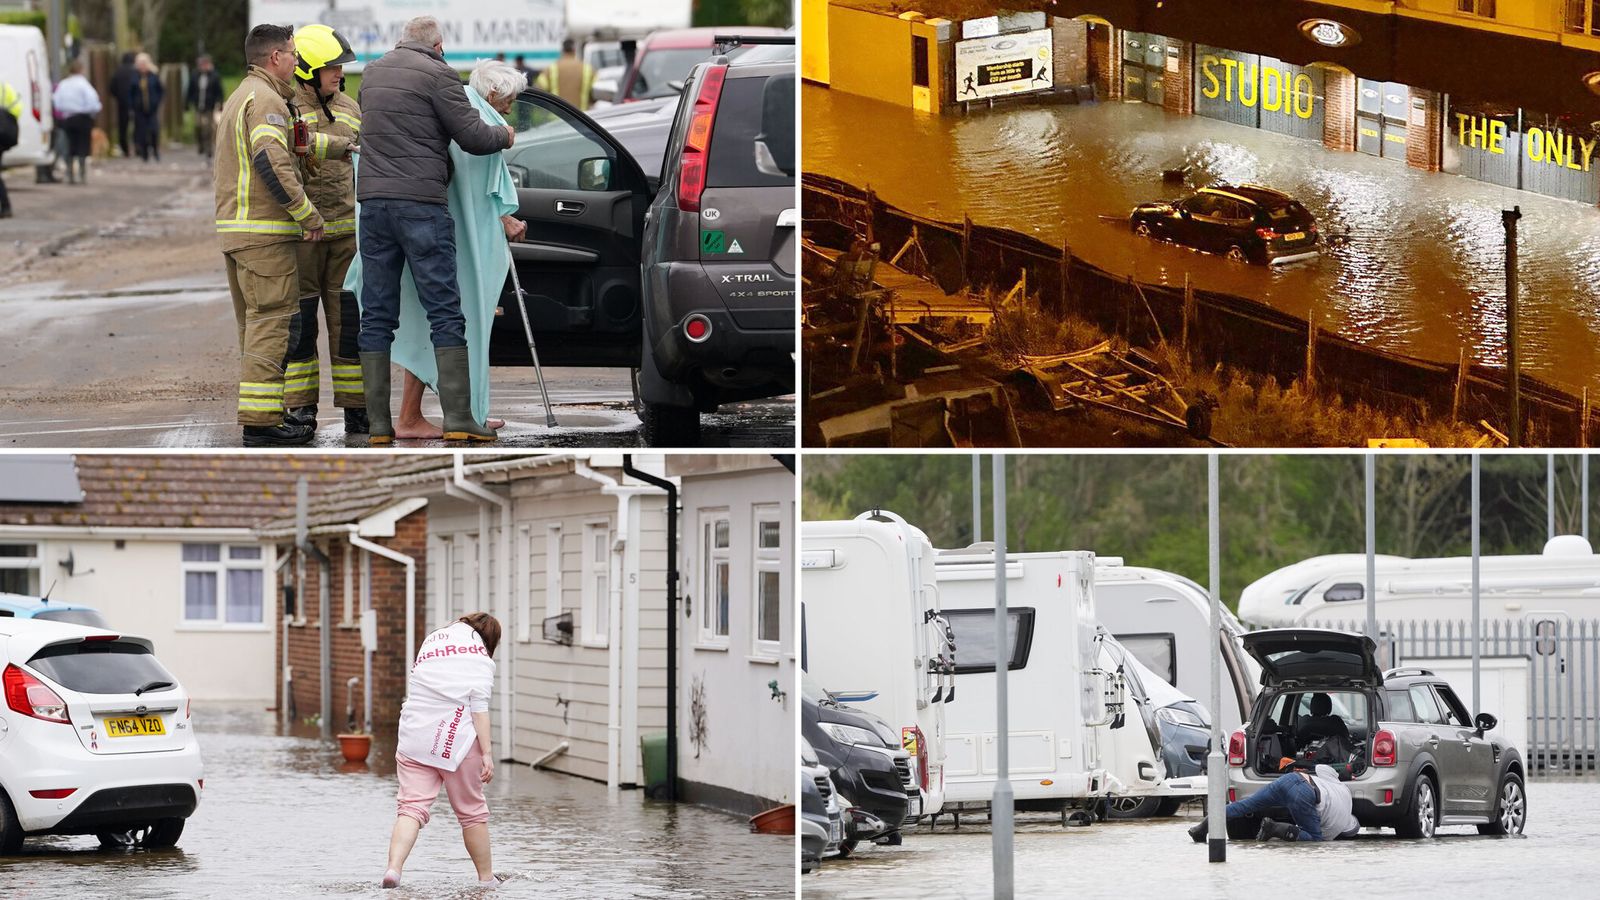 'Scary' West Sussex flooding: Rescuers warn public to 'get to high ground' with water rising -  as evacuations continue